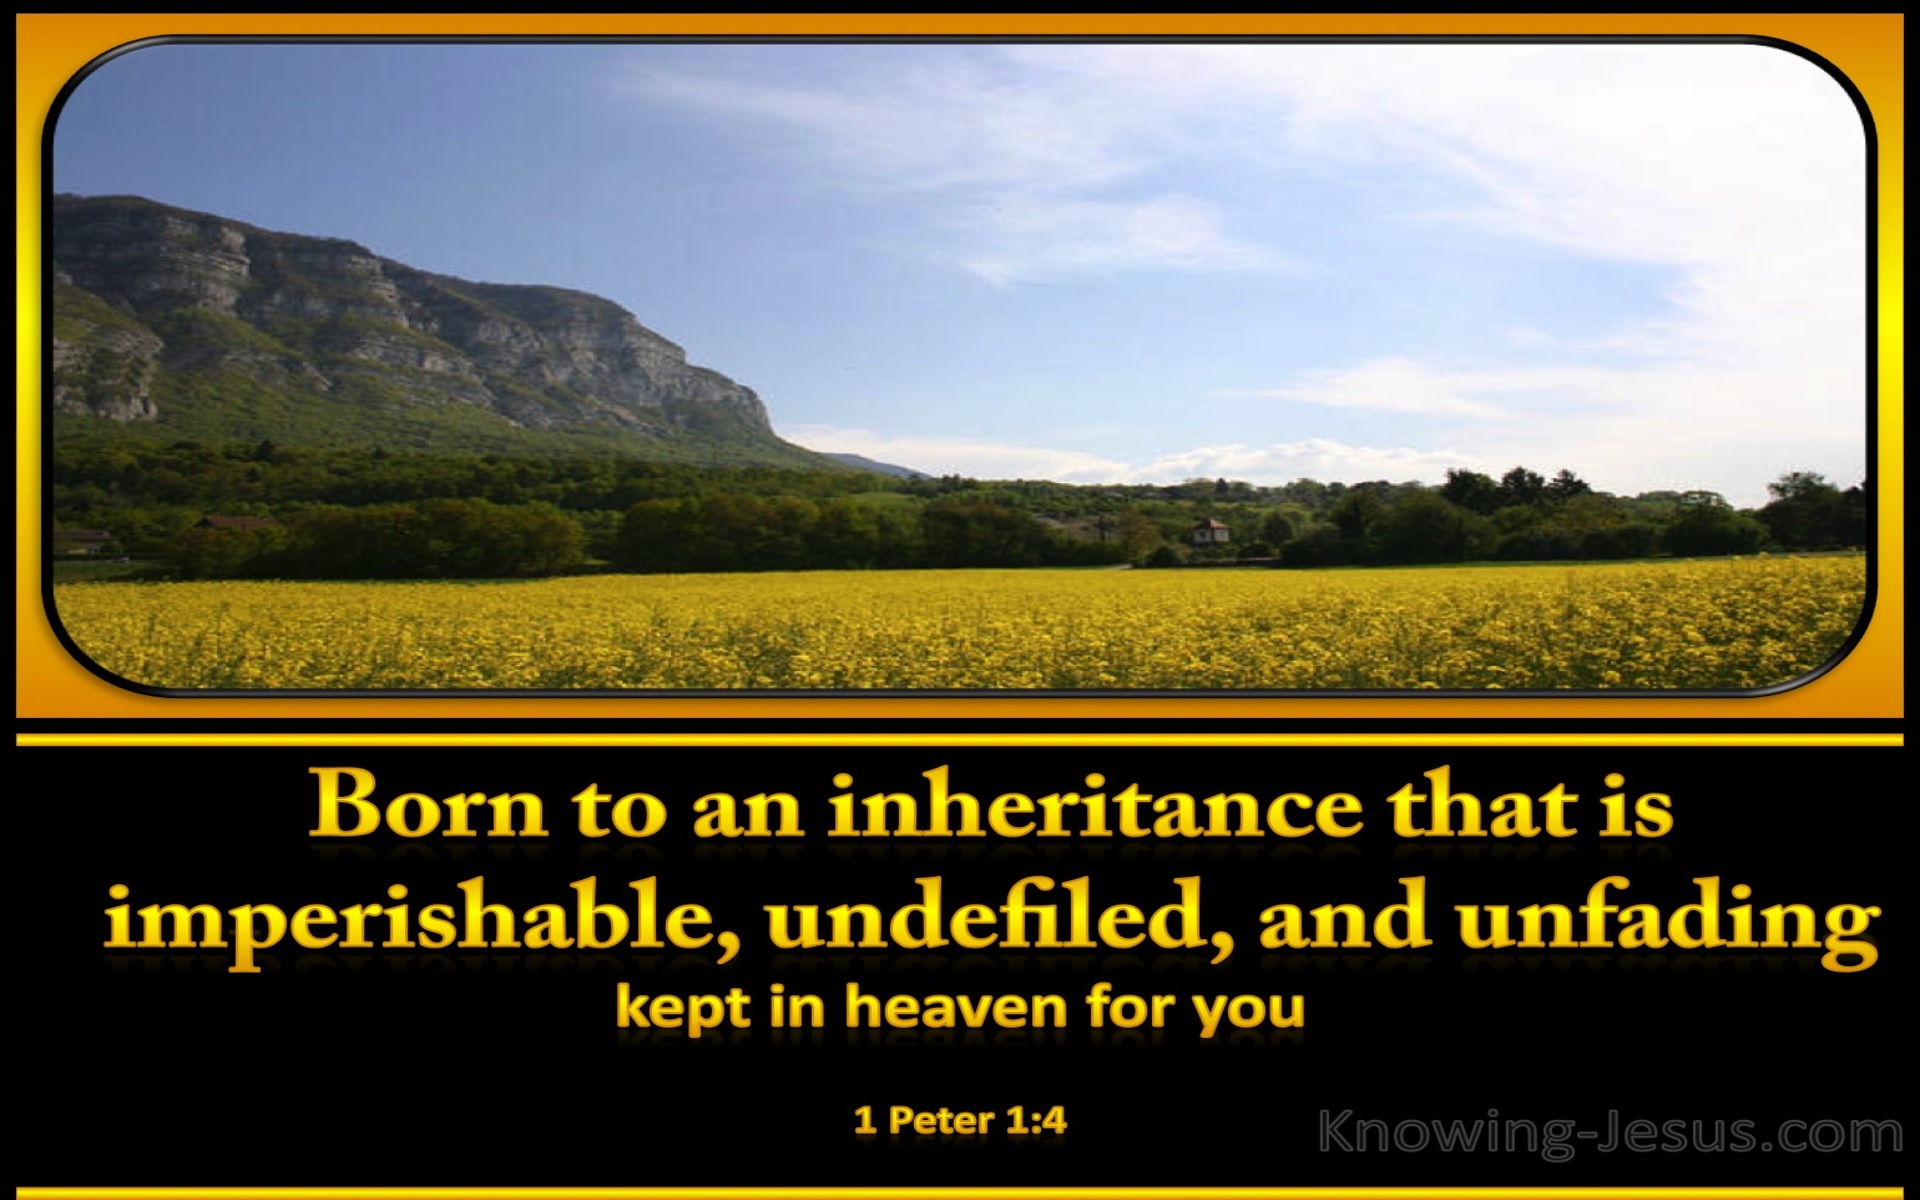 1 Peter 1:4 An Inheritance Kept in Heaven For You (yellow)